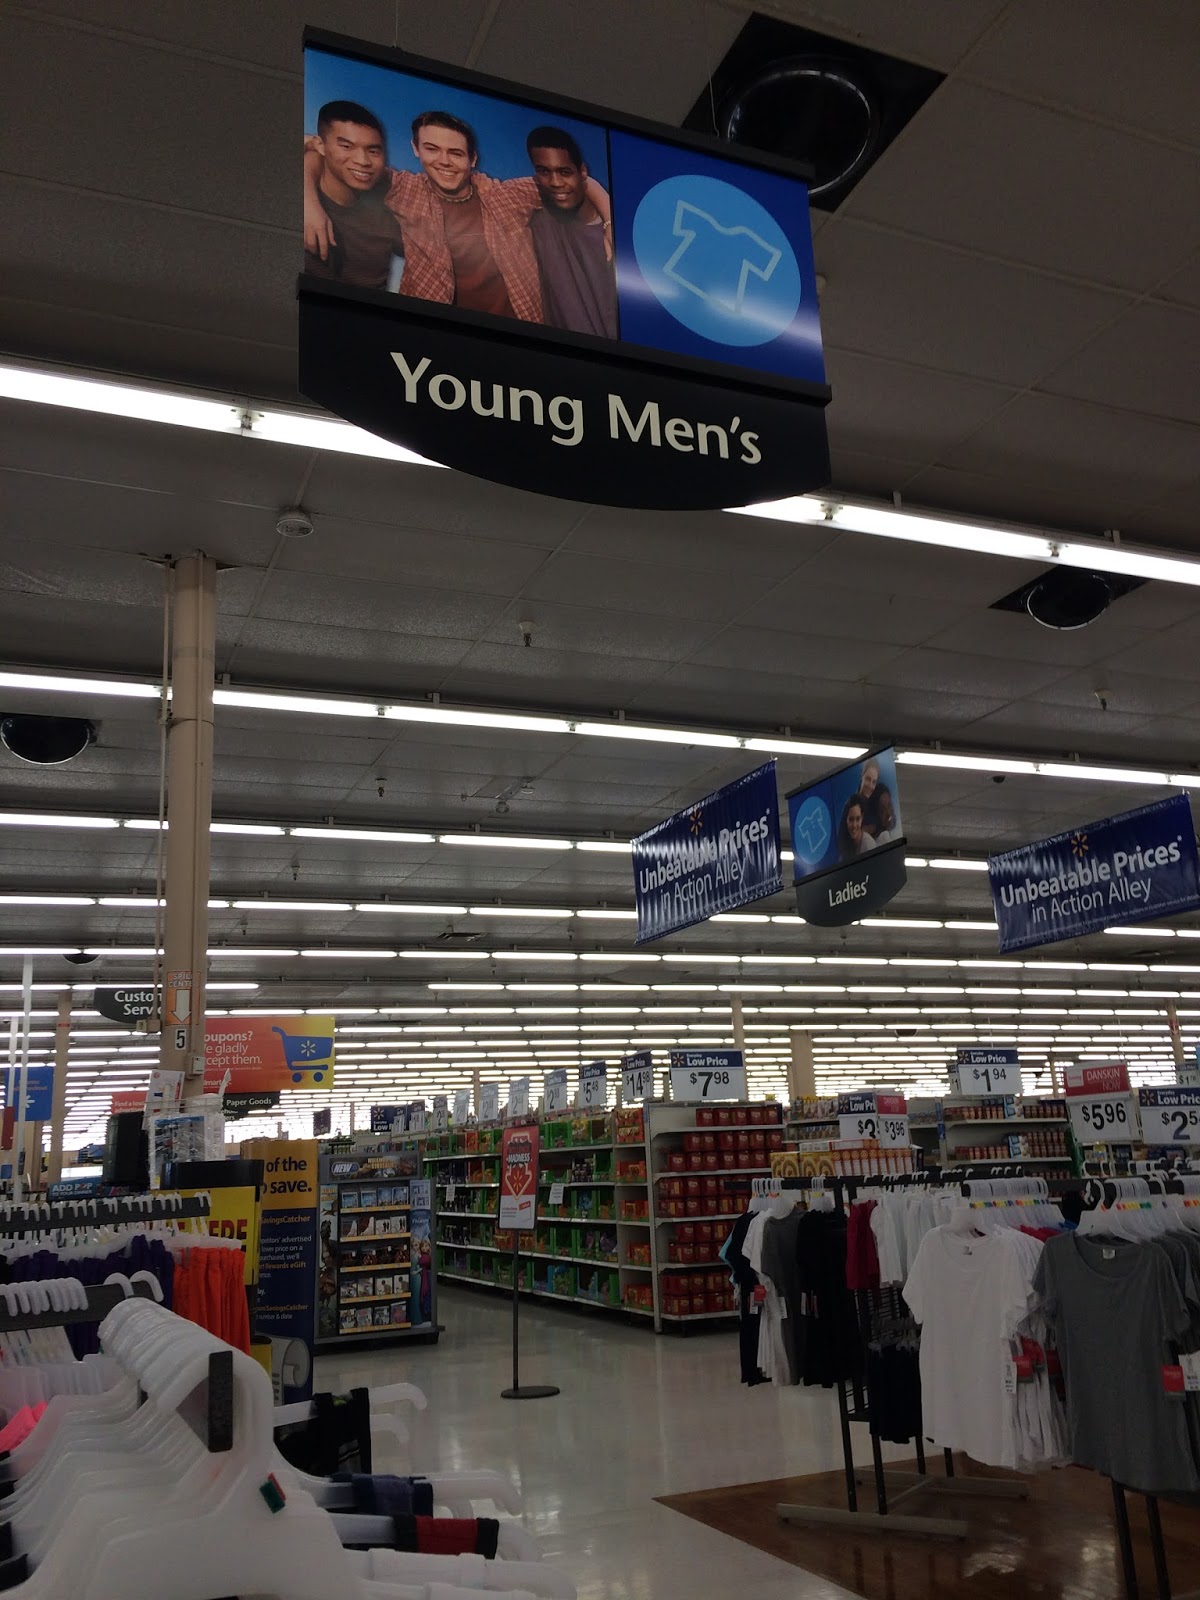 Dead and Dying retail: The story of a Wal-Mart inside a Kmart in Huntsville, AL